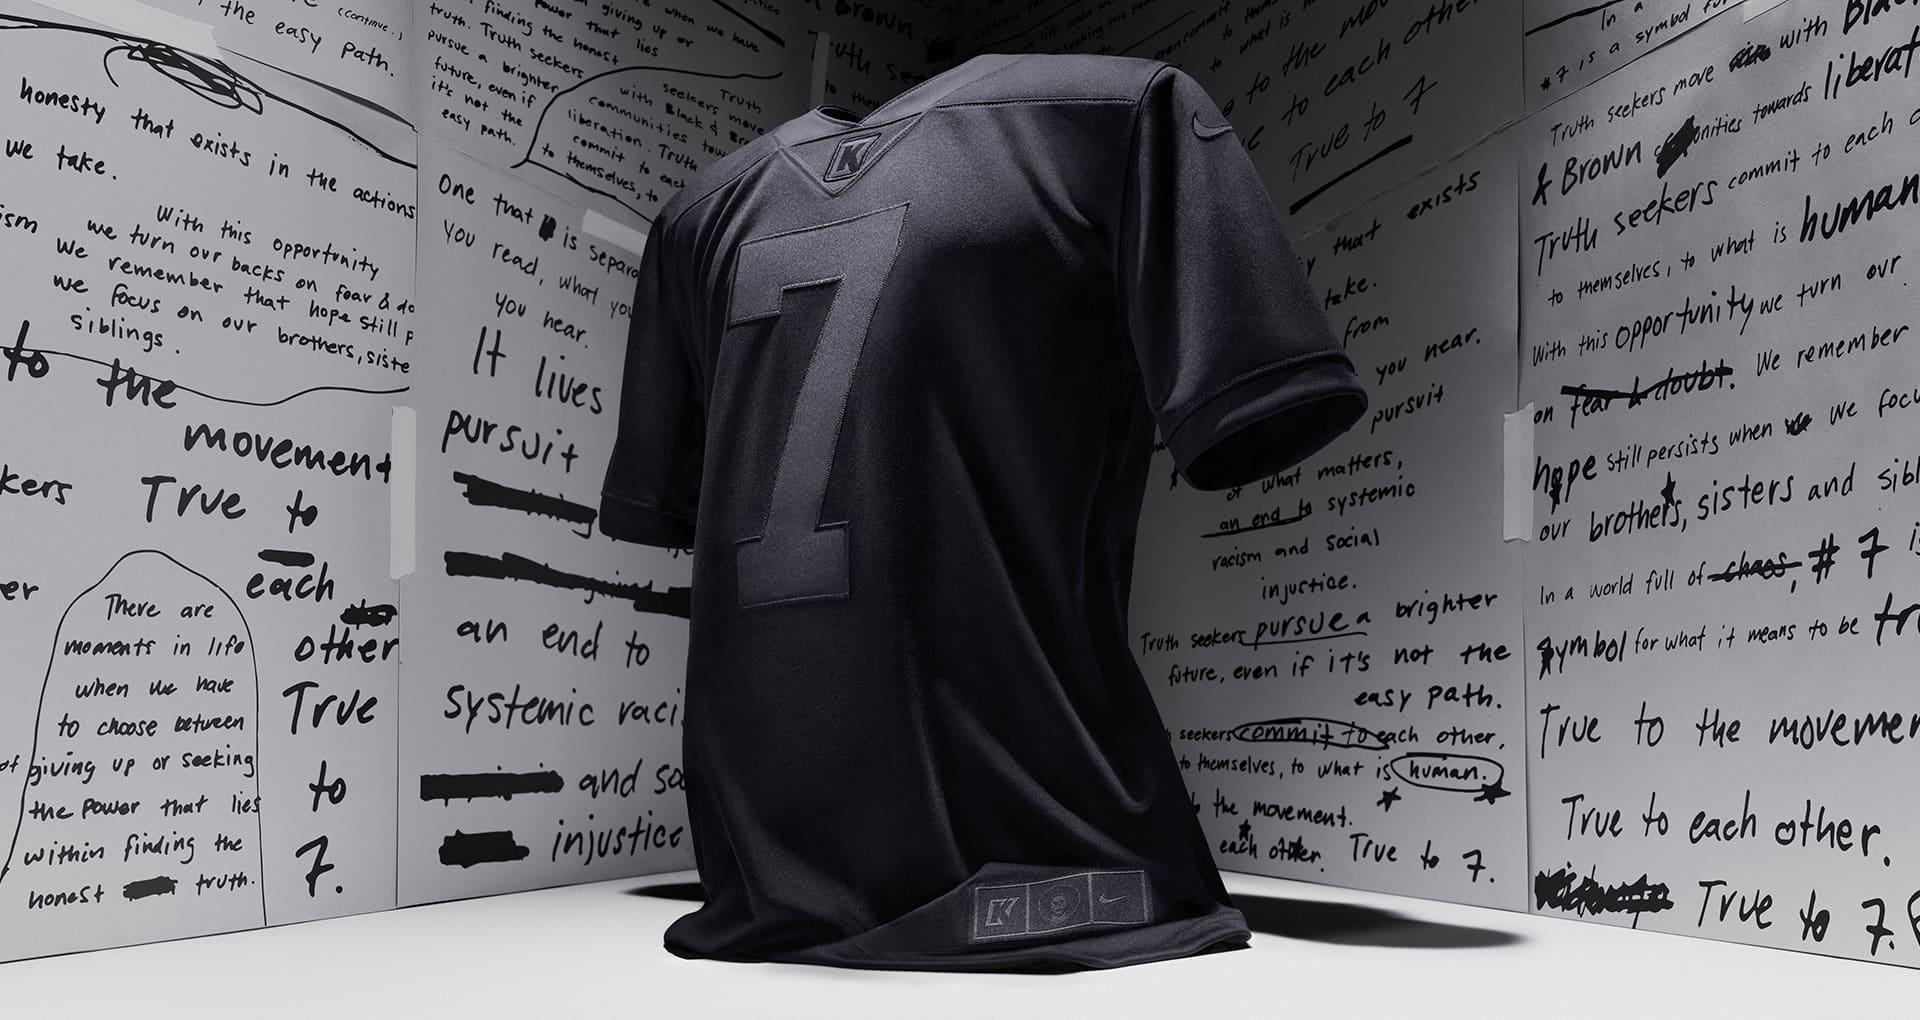 Colin Kaepernick True to 7 jersey unveiled by Nike - Sports